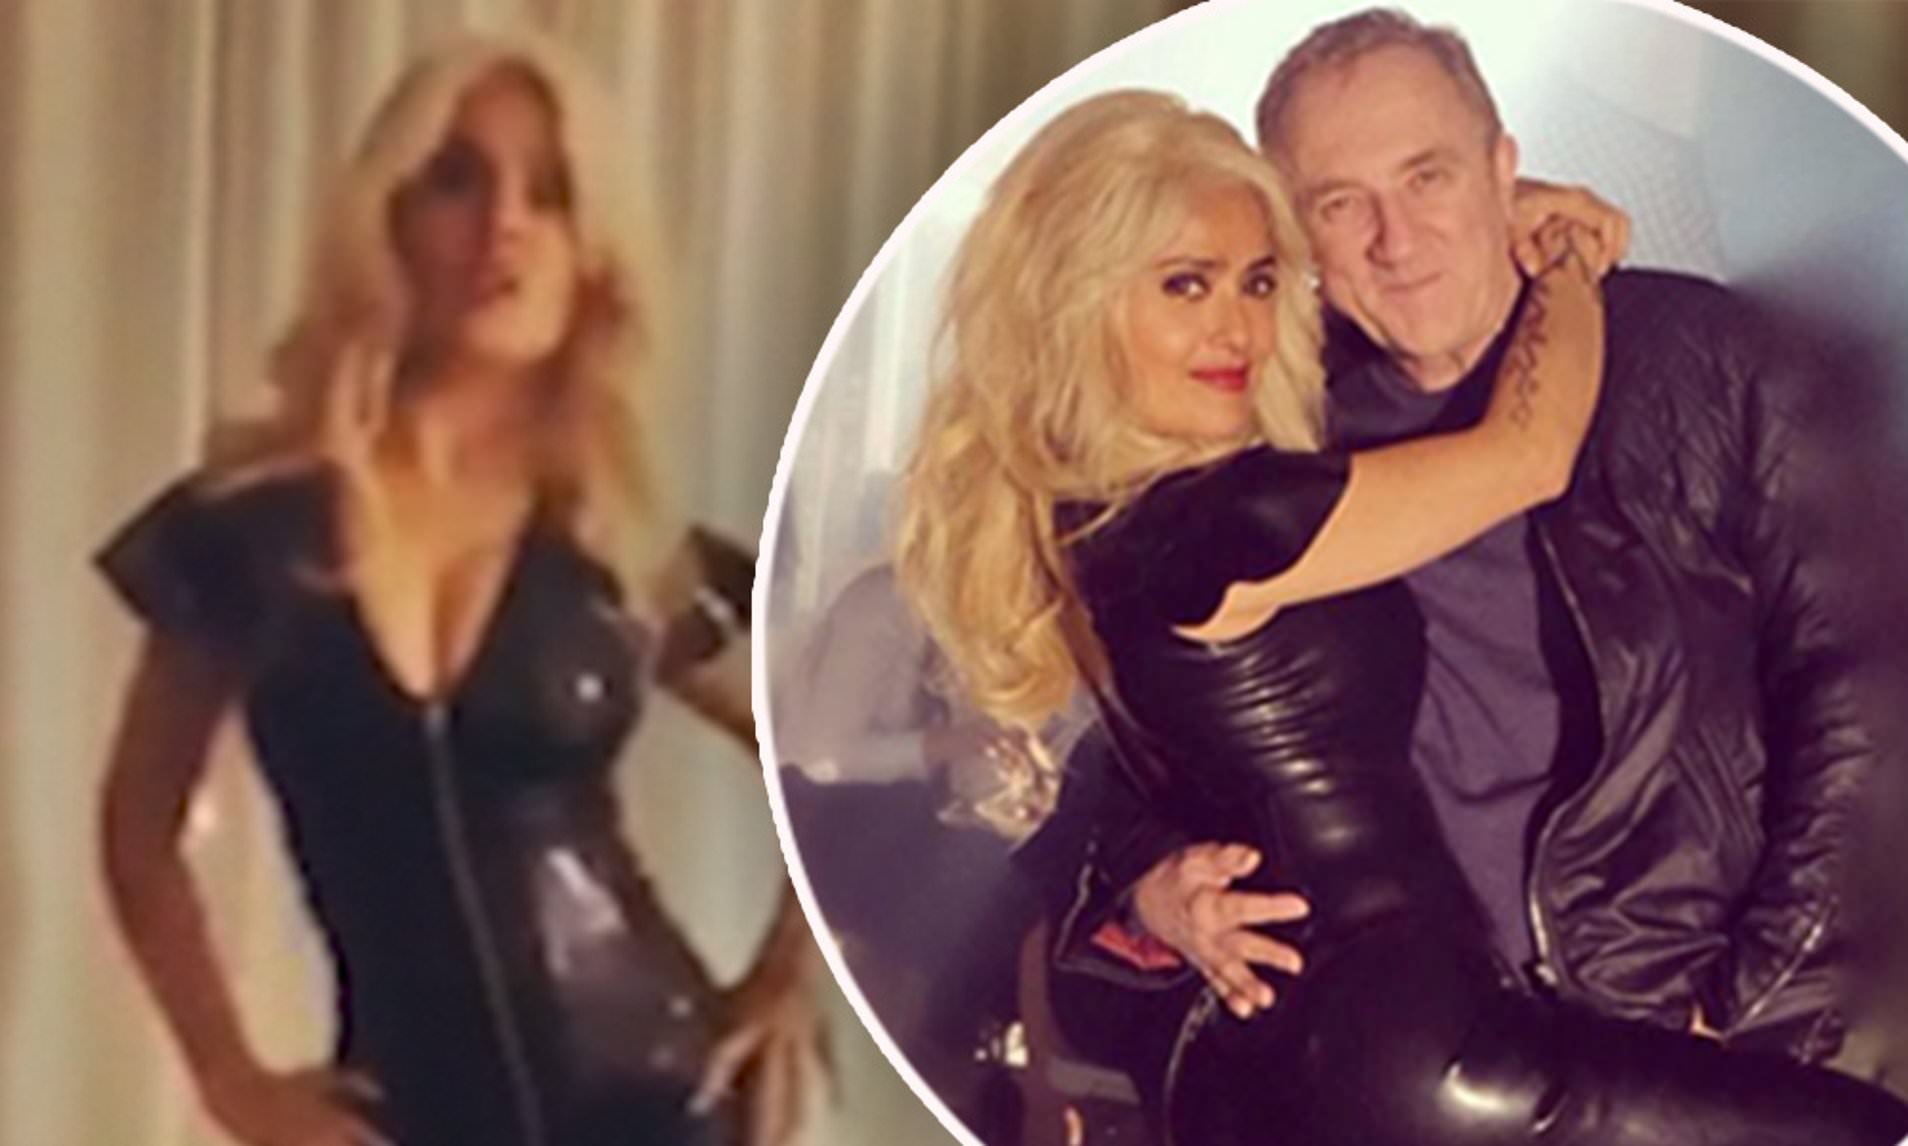 Salma Hayek, 52, is stunning in low-cut catsuit with blonde wig as she hugs husband of 10 years on The Hitman's Wife's Bodyguard set